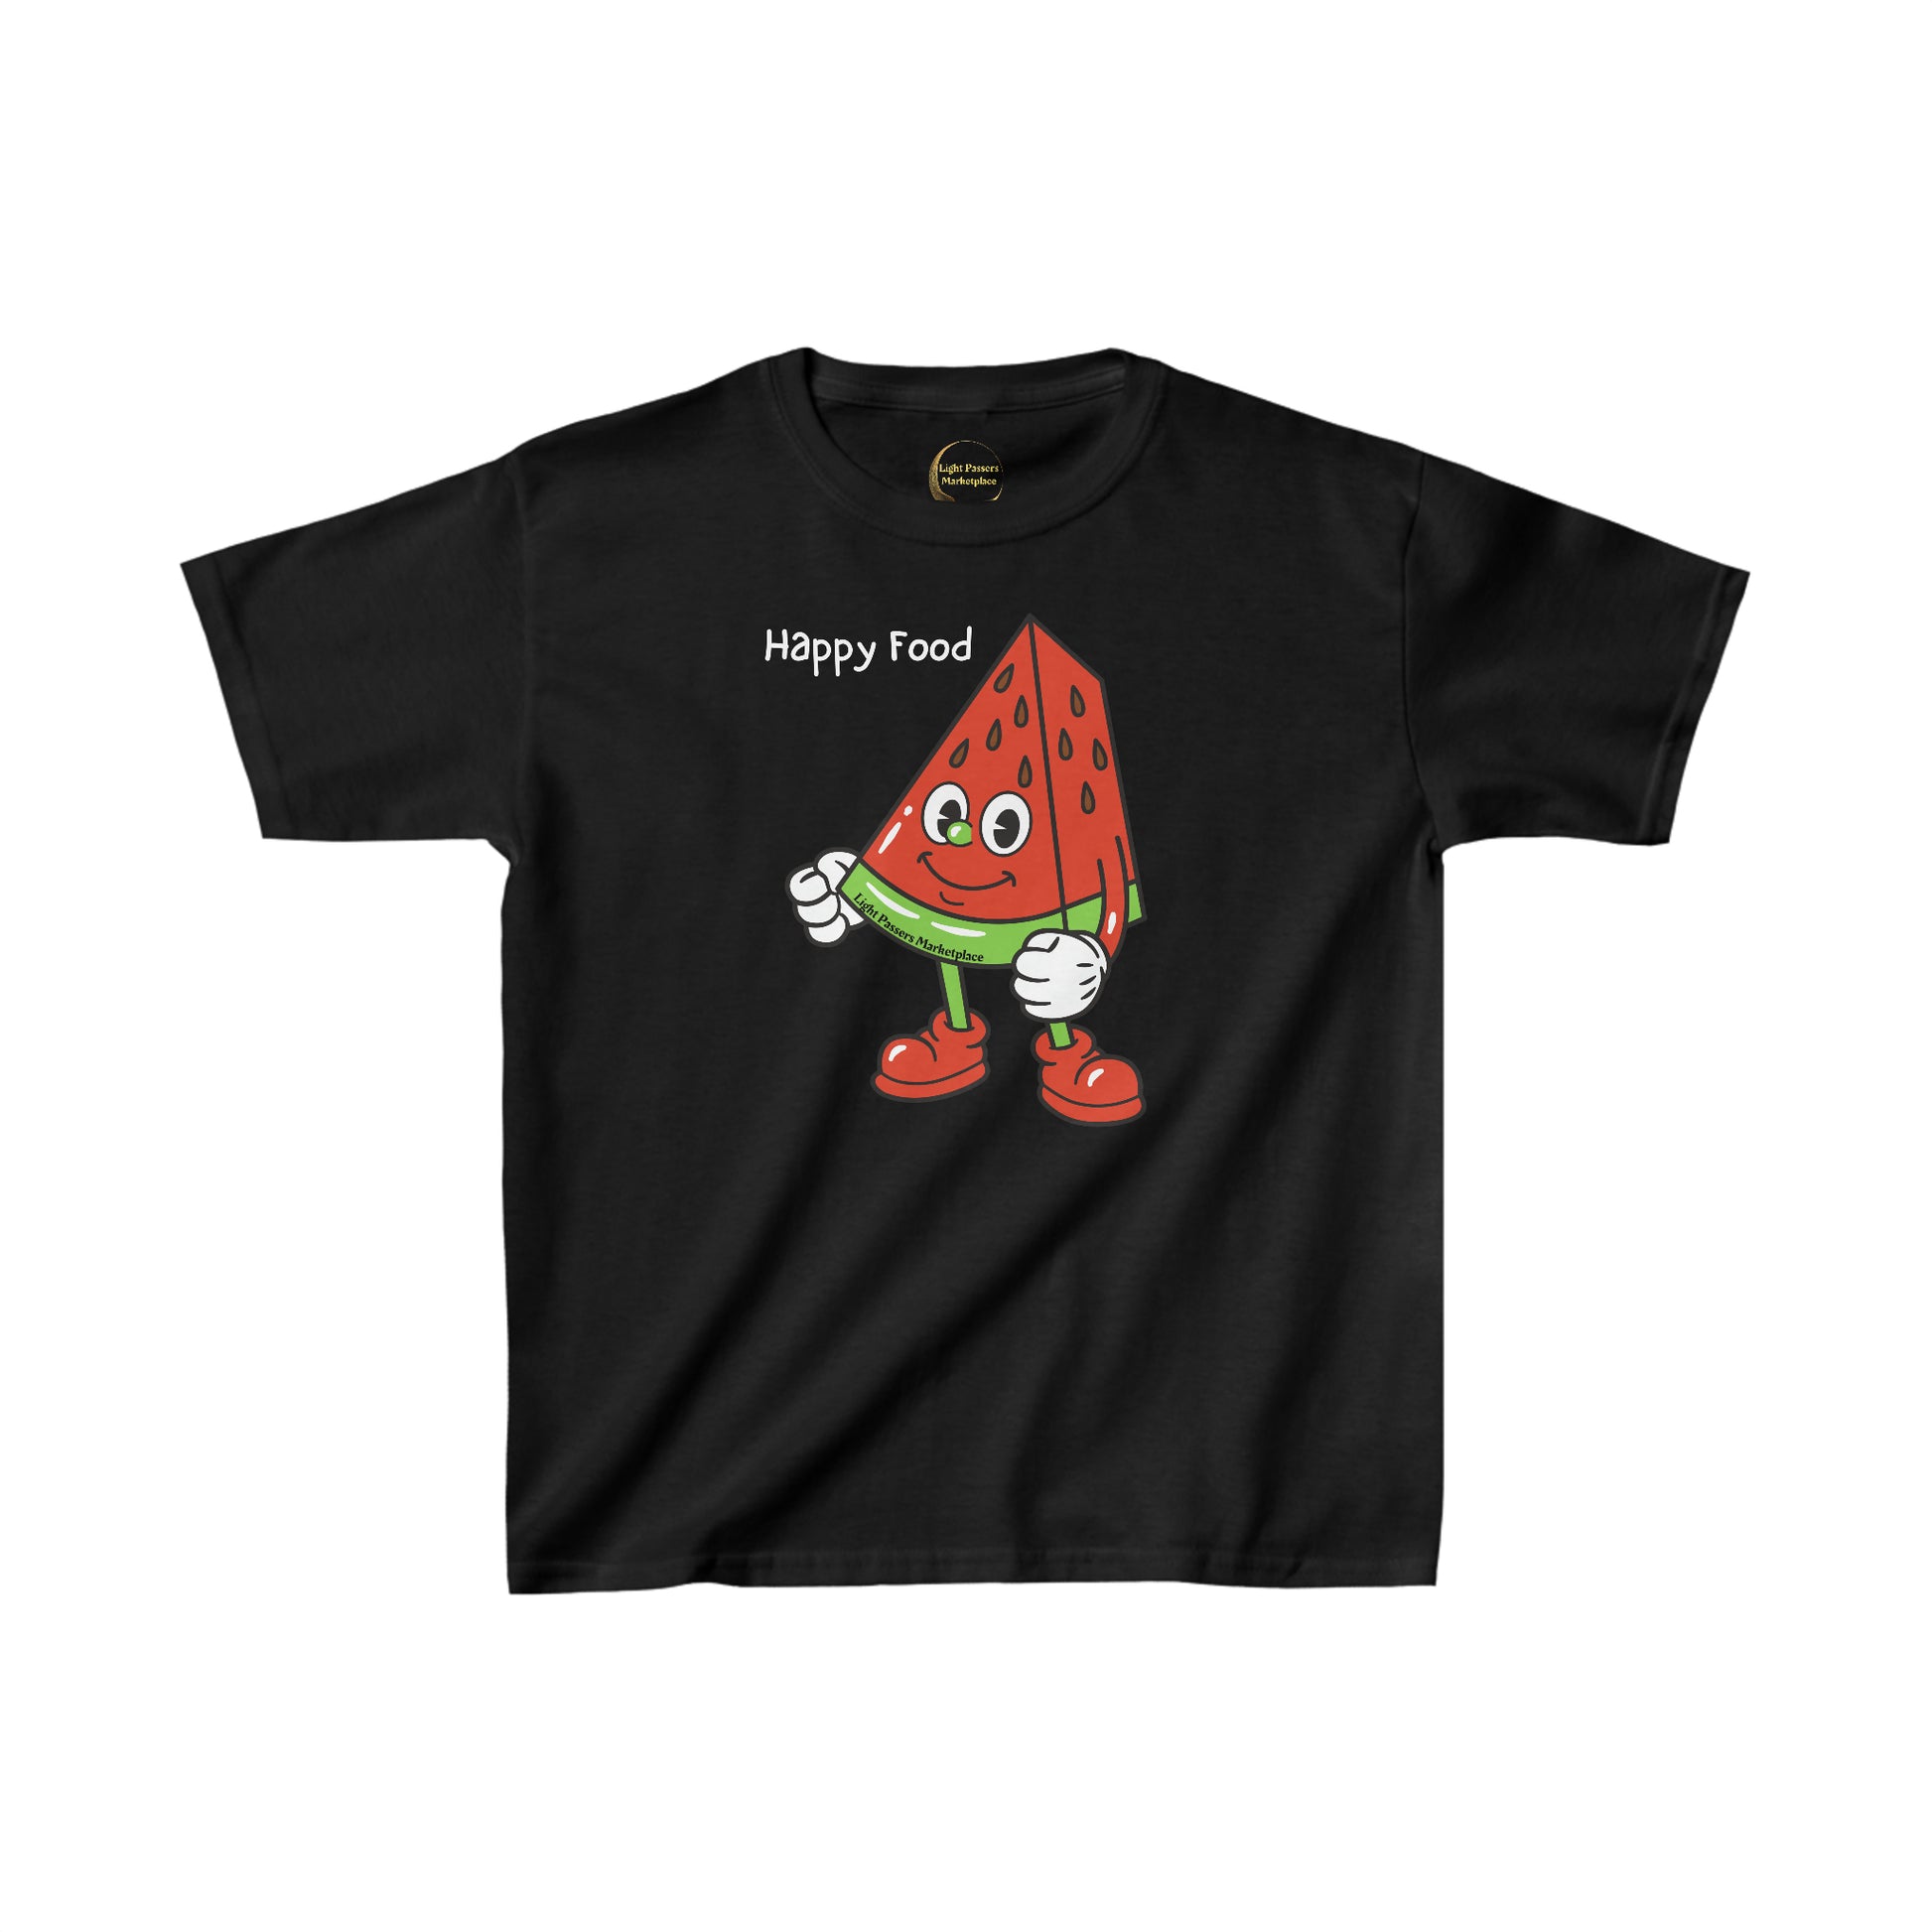 Youth black t-shirt featuring a cartoon watermelon design and fist graphic. Made of 100% cotton with twill tape shoulders for durability and ribbed collar for curl resistance. Ethically sourced US cotton.